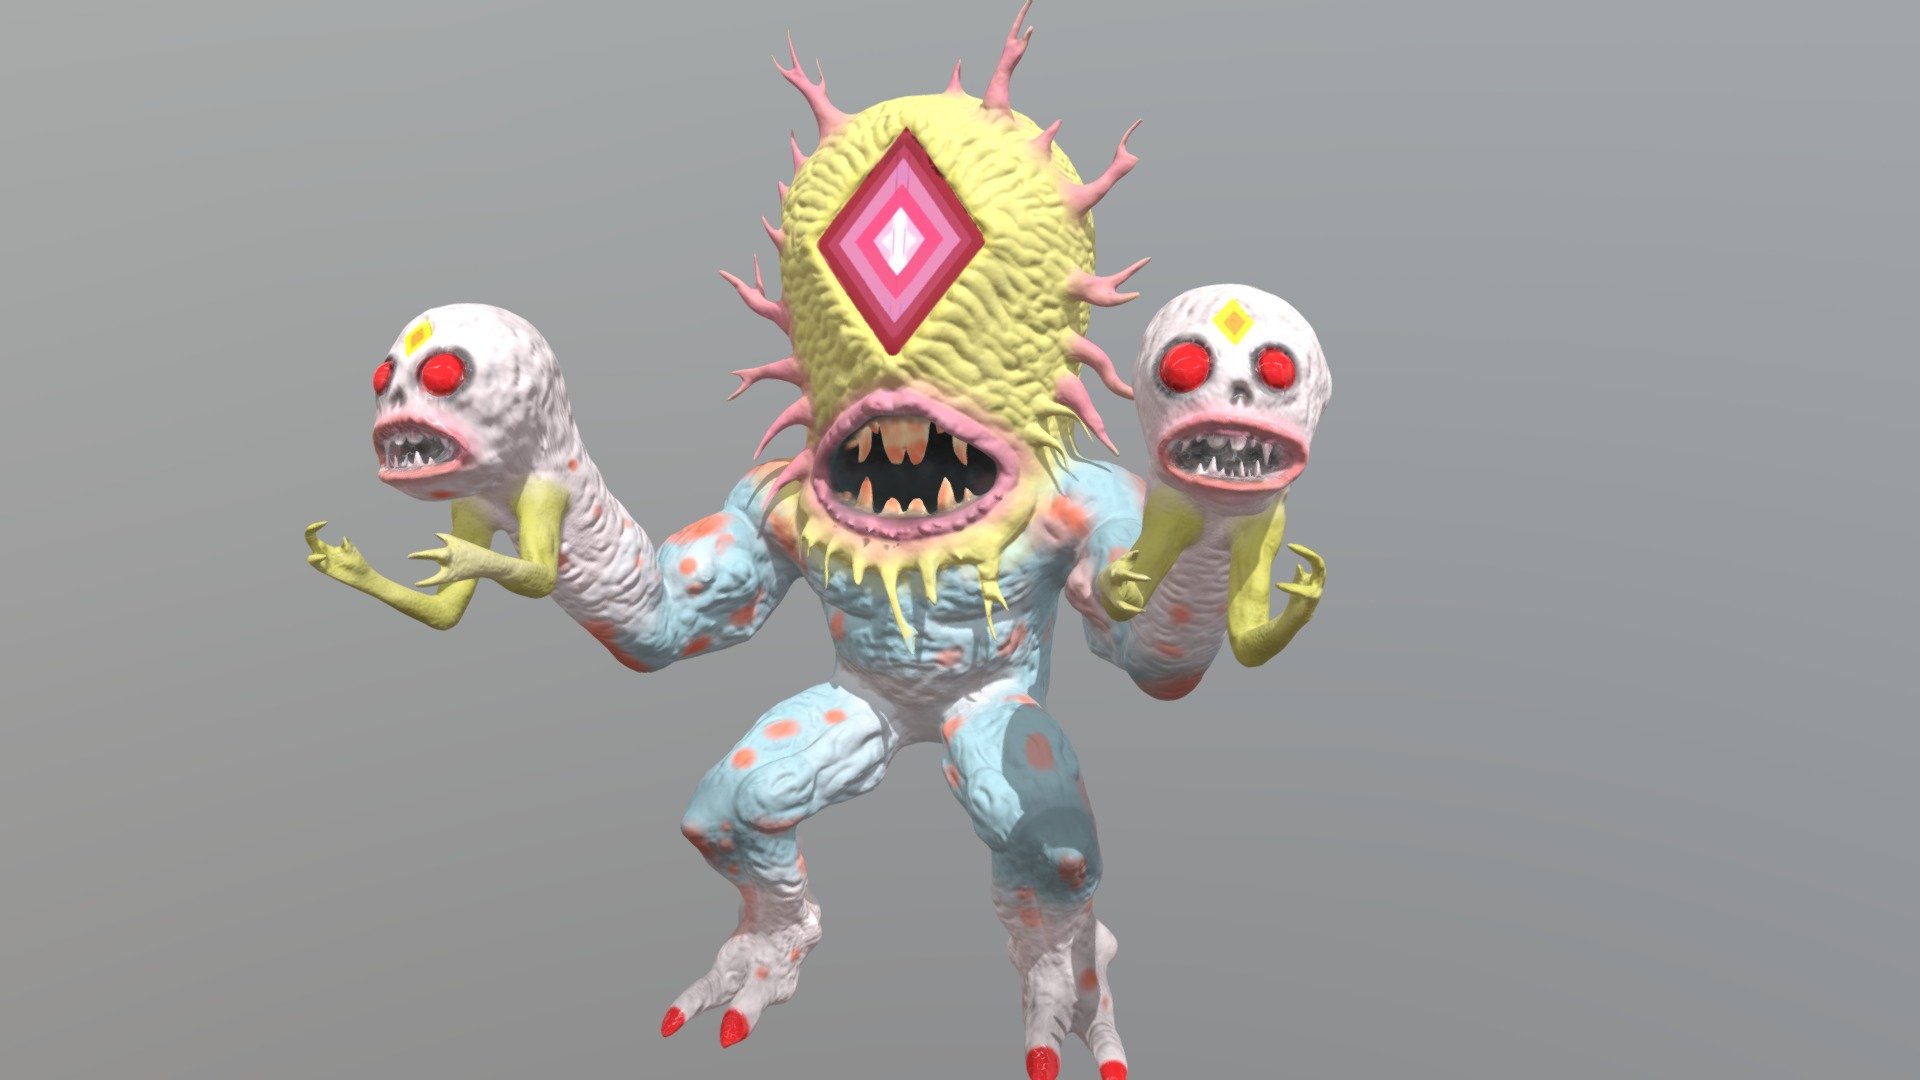 My take on a design by  Skinner! He is one of my favorite artists of all time, so I sculpted some of his designs for a little VR video project. You can find him on insta: @theartofskinner or at www.theartofskinner.com

The 360 Video is available at youtube.com/nateordie - Skinner Monster Humanoid - 3D model by nateordie 3d model